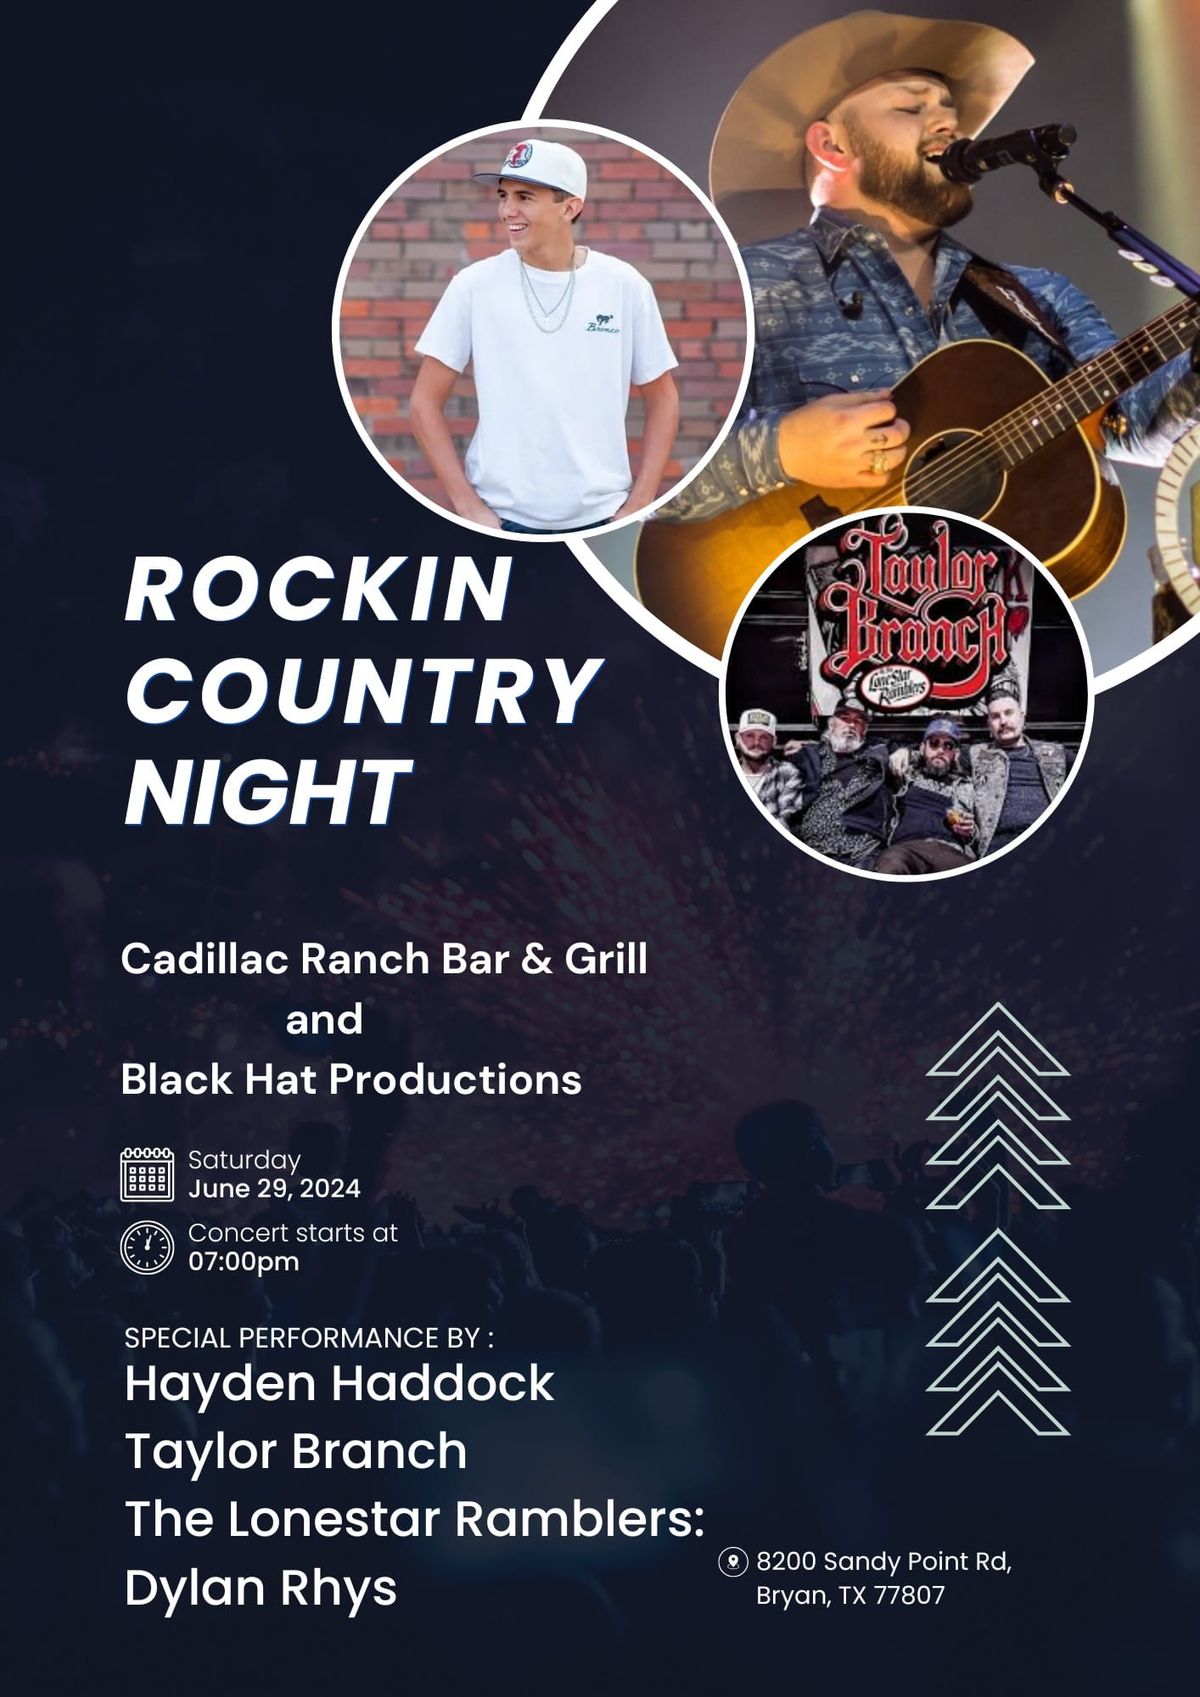 Rockin Country Night at the Lake Hayden Haddock Taylor Branch and the Lonestar Ramblers Dylan Rhys